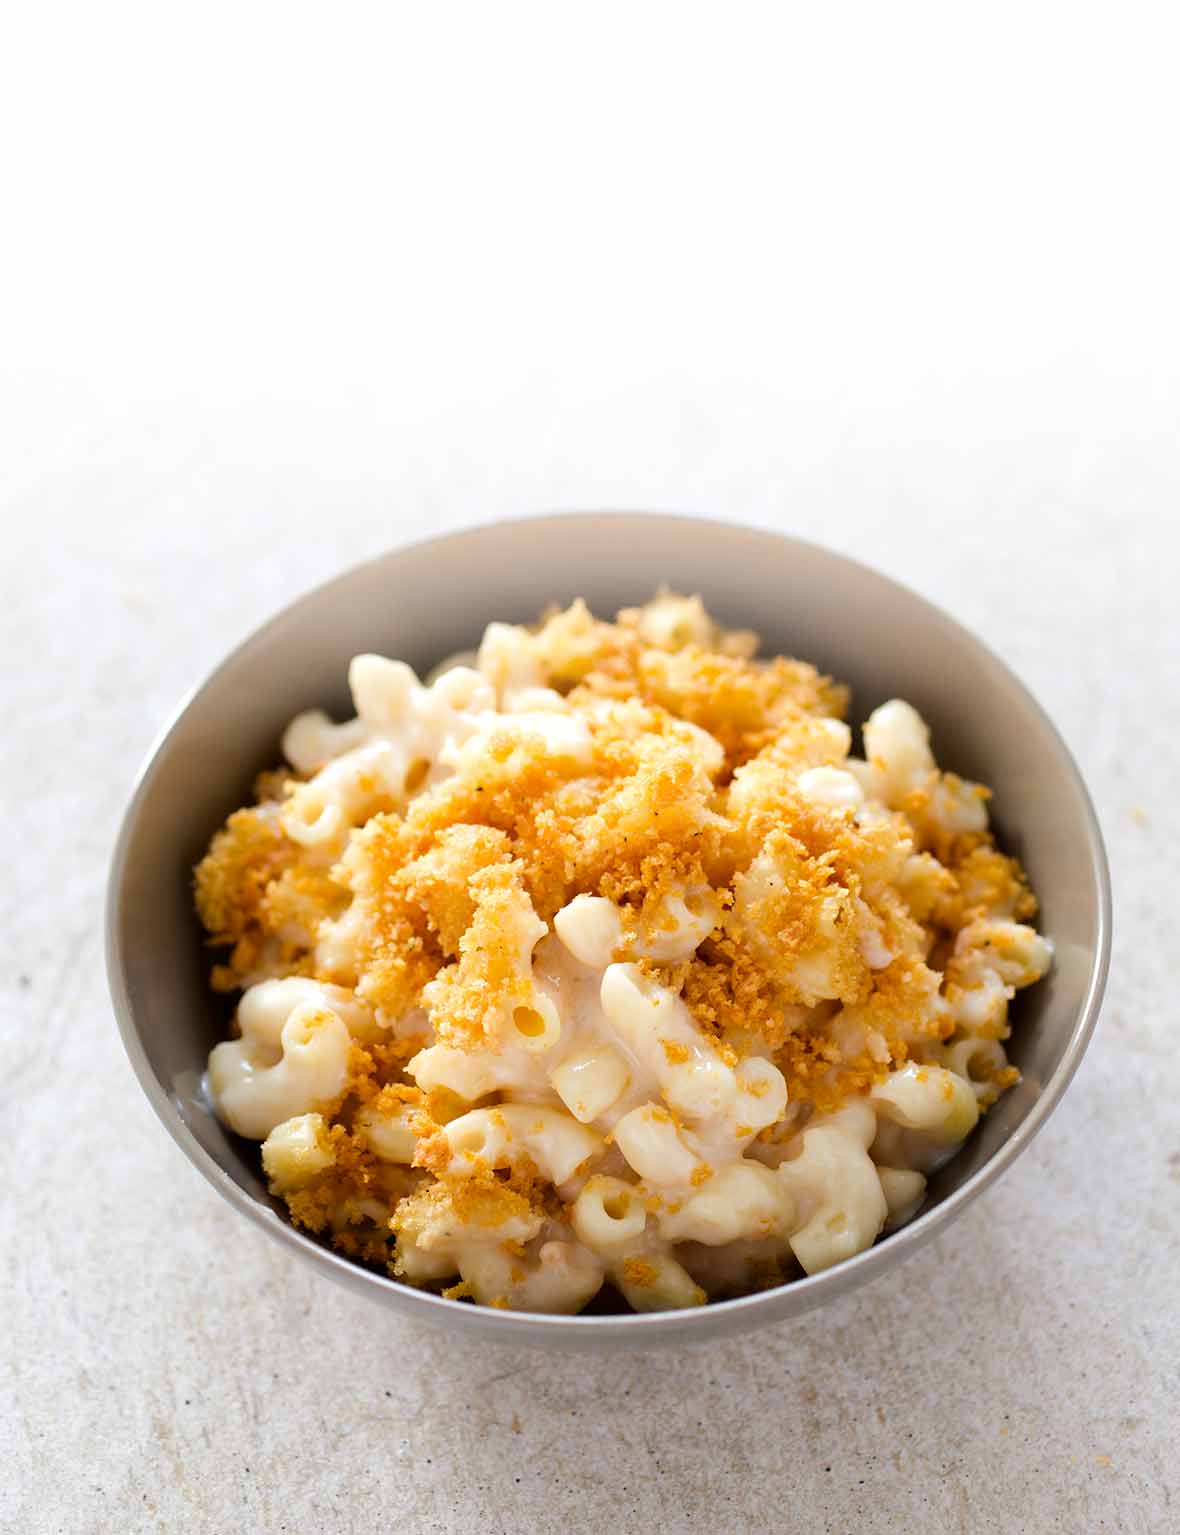 Baked Mac And Cheese With Bread Crumbs Recipe Leite S Culinaria